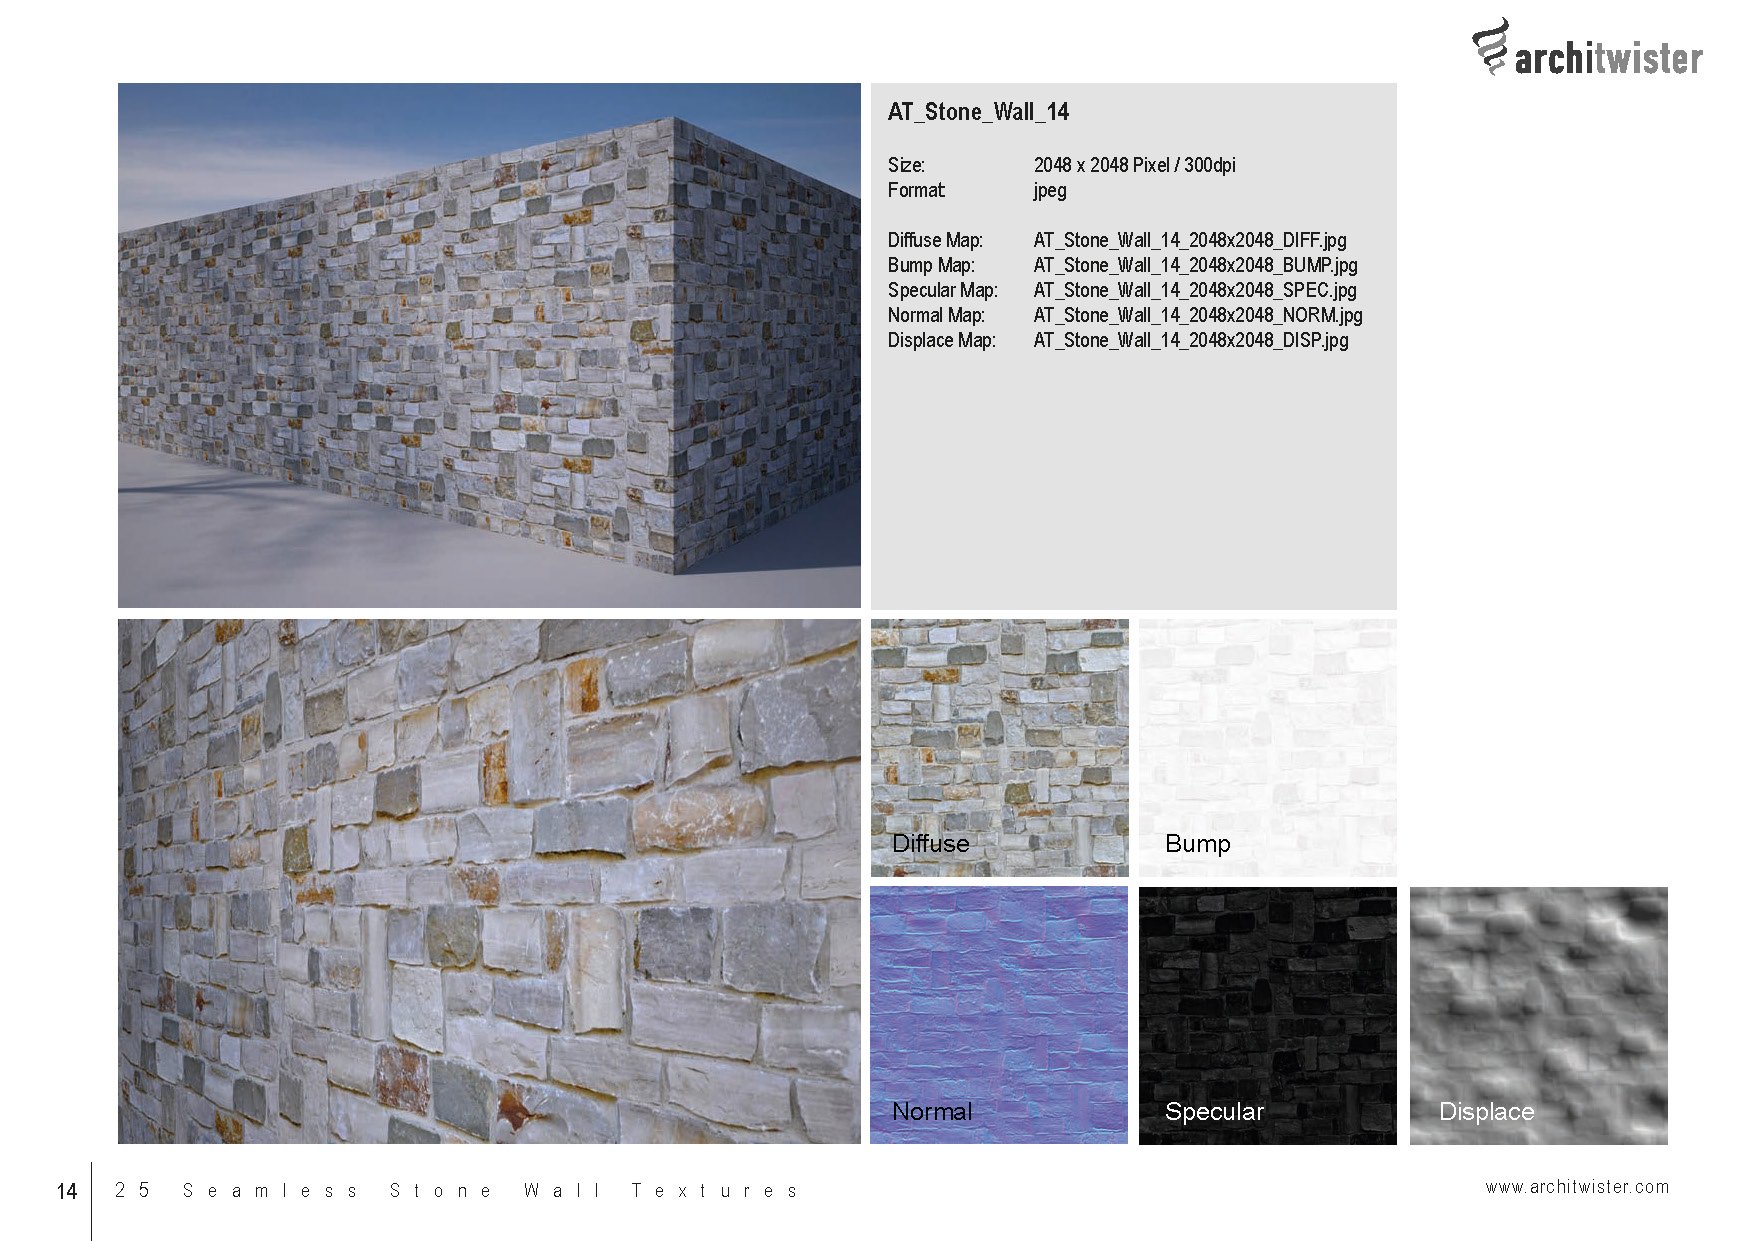 at stone wall textures catalog 01 seite 15 273